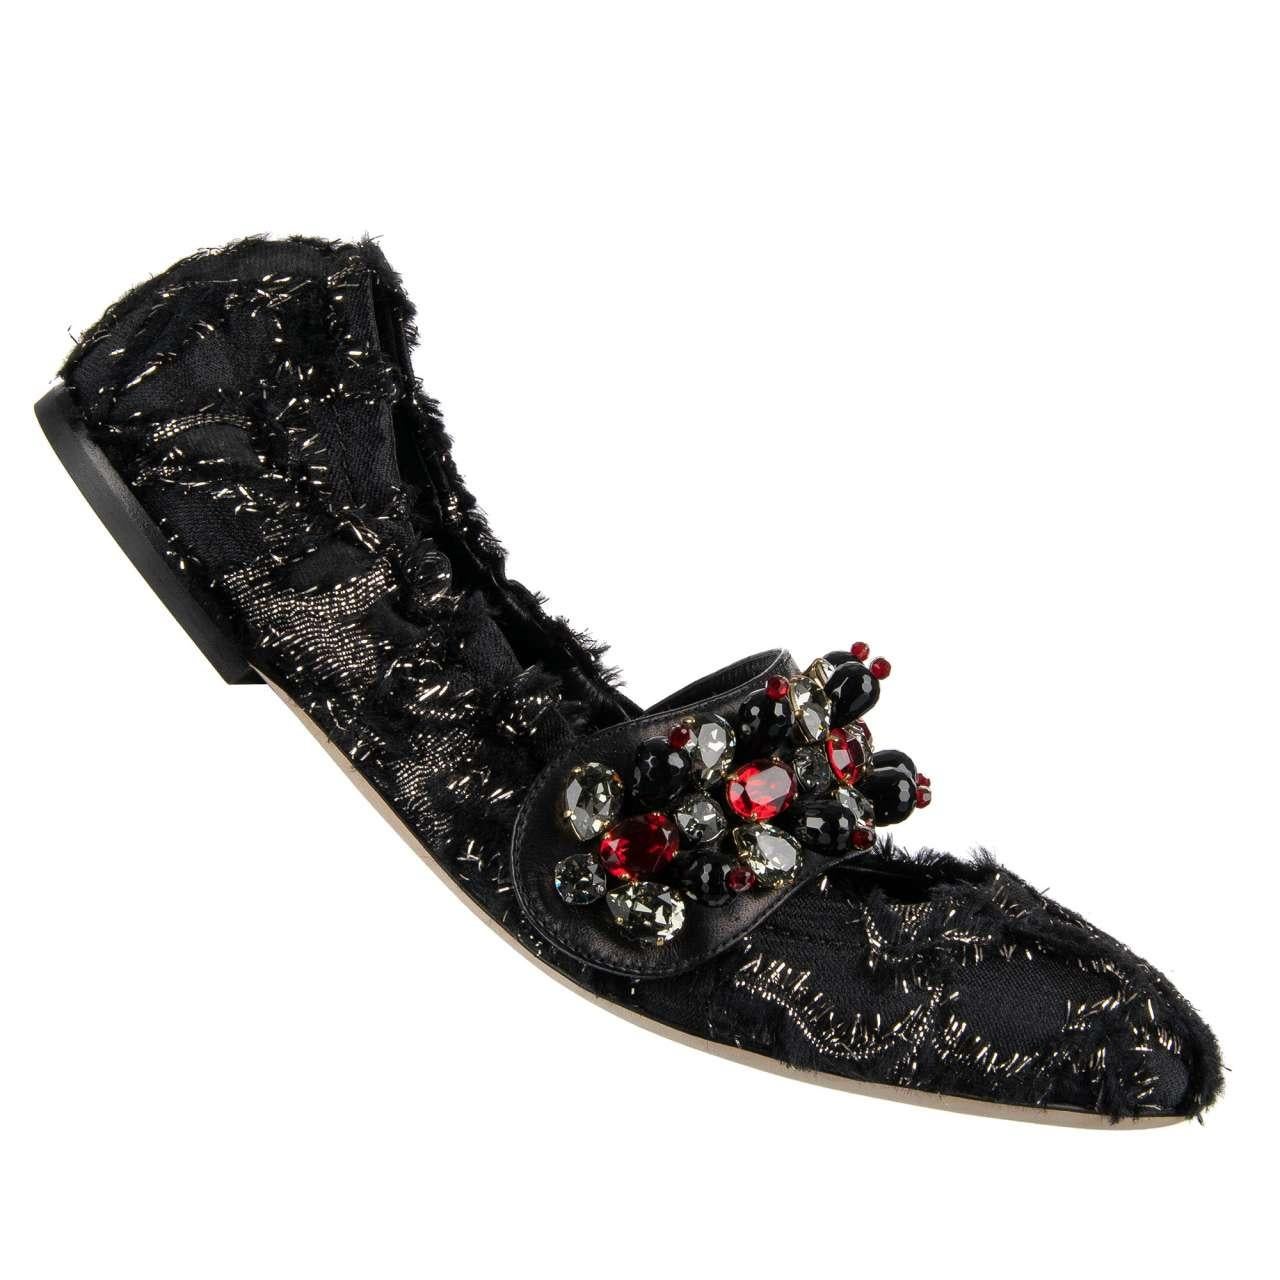 Dolce & Gabbana - Brocade Ballet Flats VALLY with Crystals EUR 38 For Sale 1